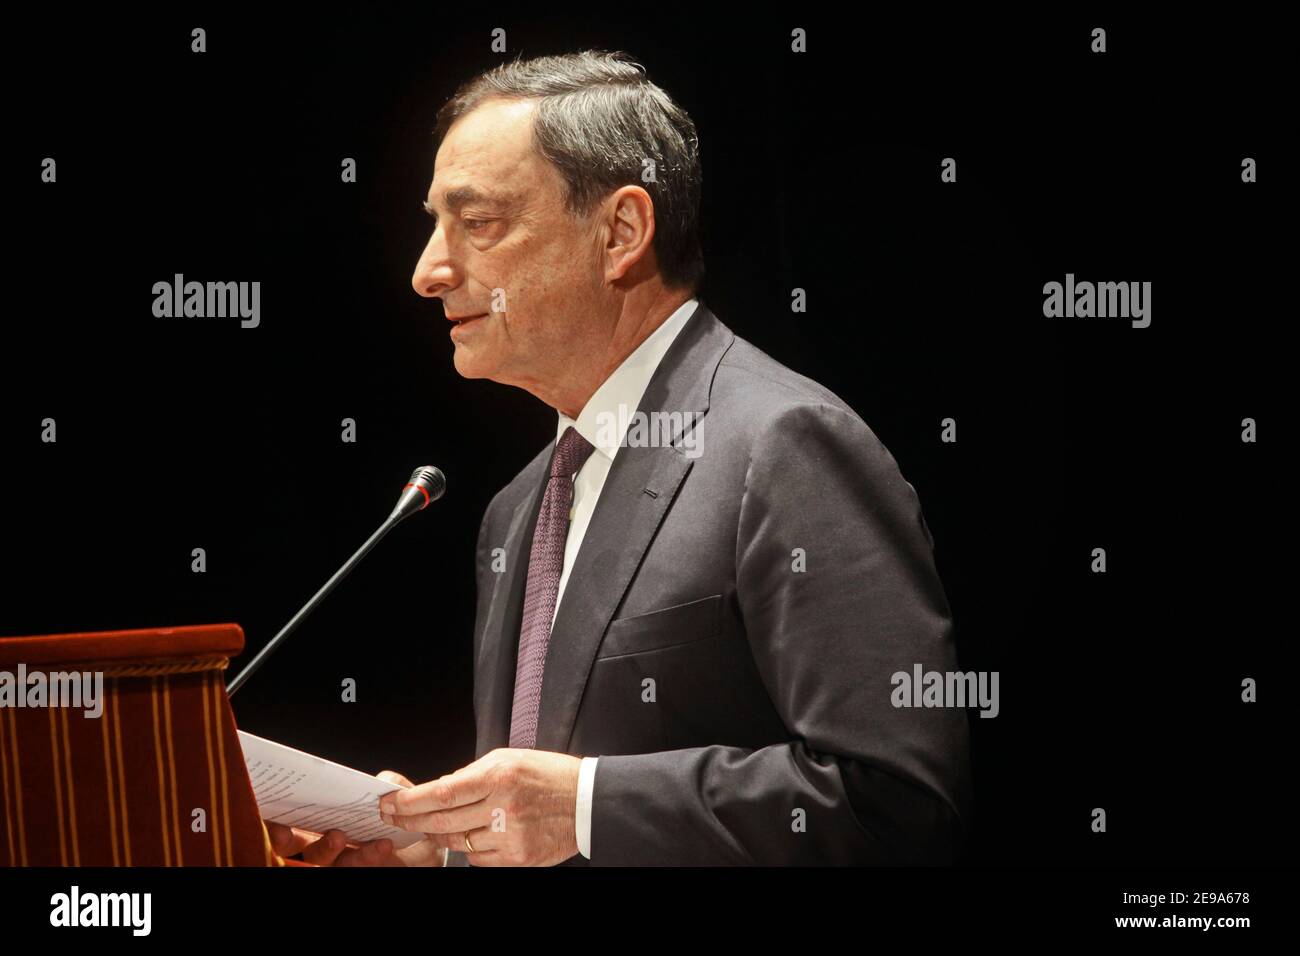 Mario Draghi, President of the European Central Bank , speaks at a press conference. Rome, Italy - April 2018 Stock Photo